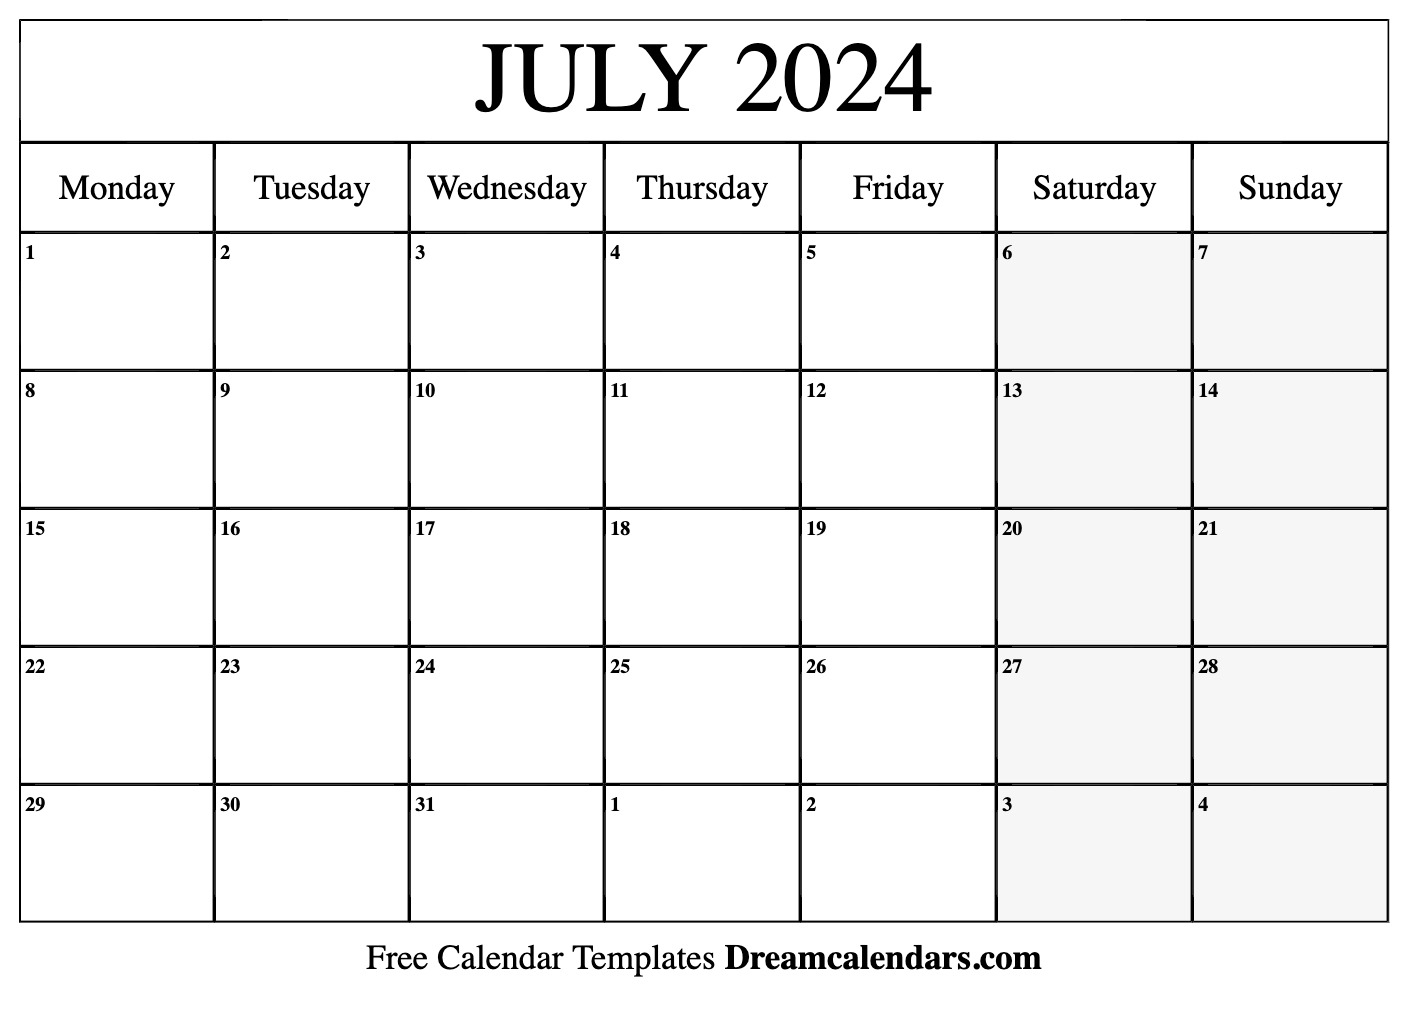 July 2024 Calendar | Free Blank Printable With Holidays for July 2024 Monthly Calendar Printable